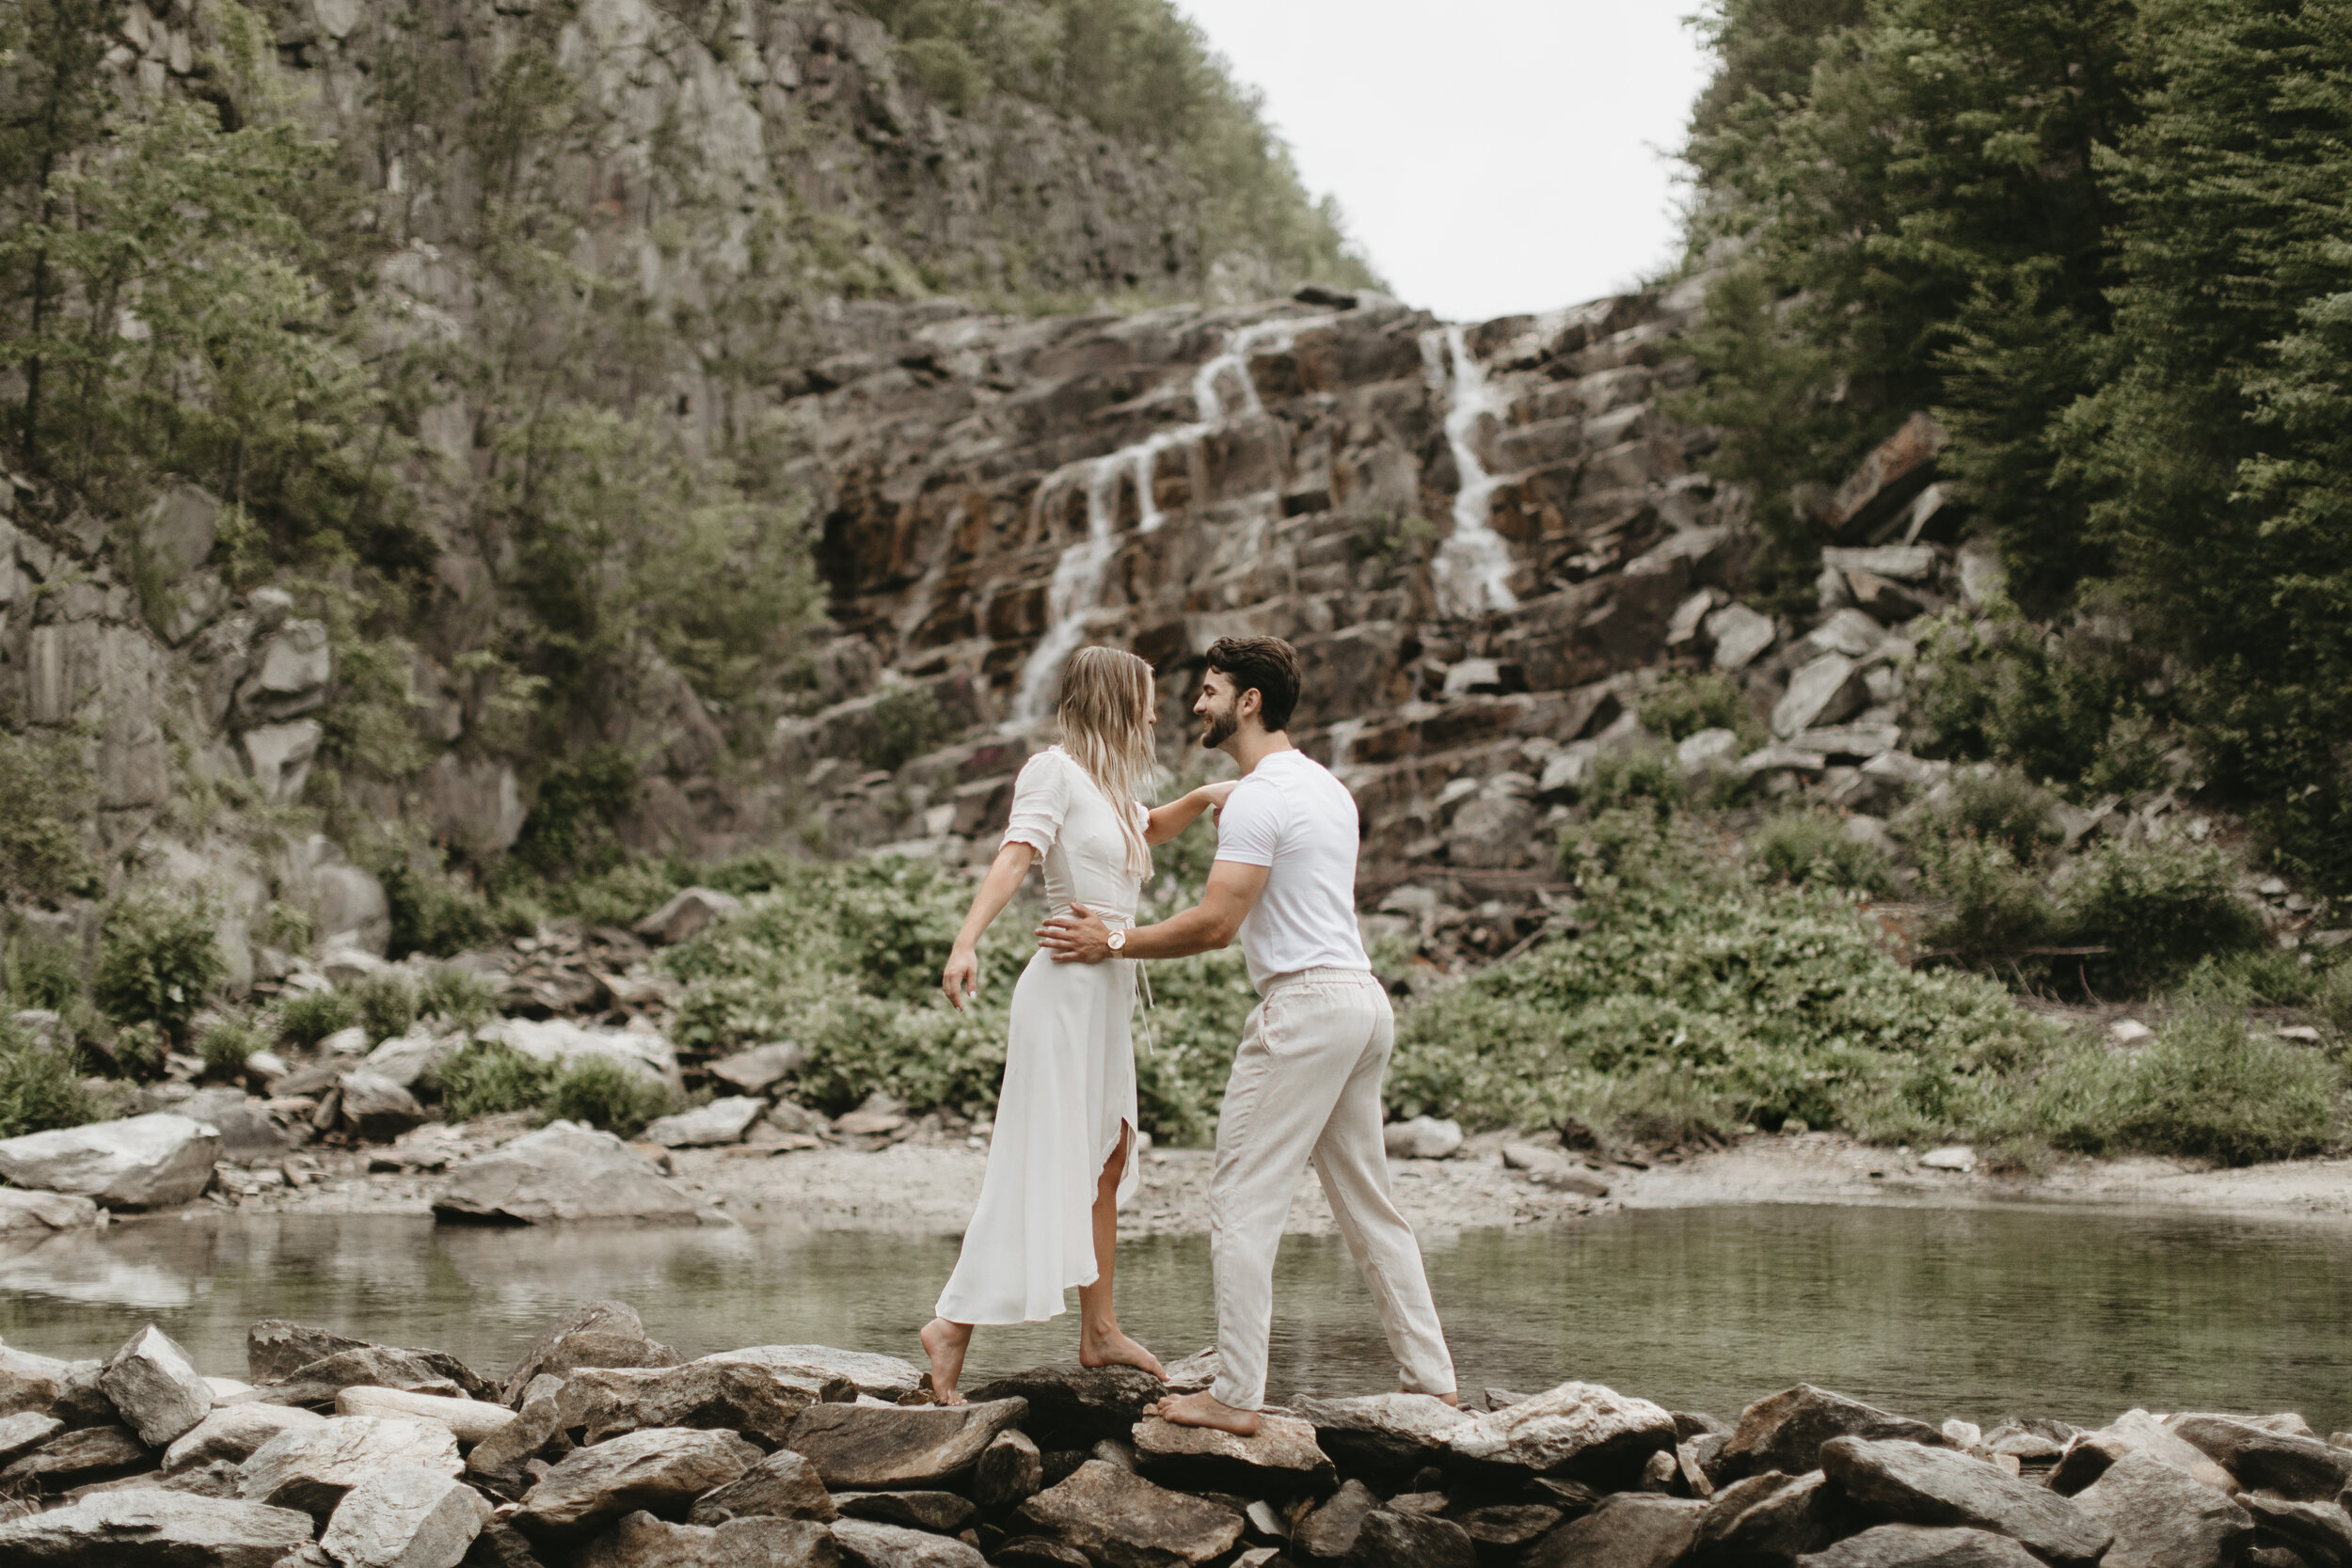 Nicole-Daacke-Photography-michaux-state-forest-elopement-adventure-engagement-session-pennsylvania-elopement-pa-elopement-photographer-gettysburg-photographer-state-park-elopement-engagement-session-pennsylvania-waterfall-165.jpg